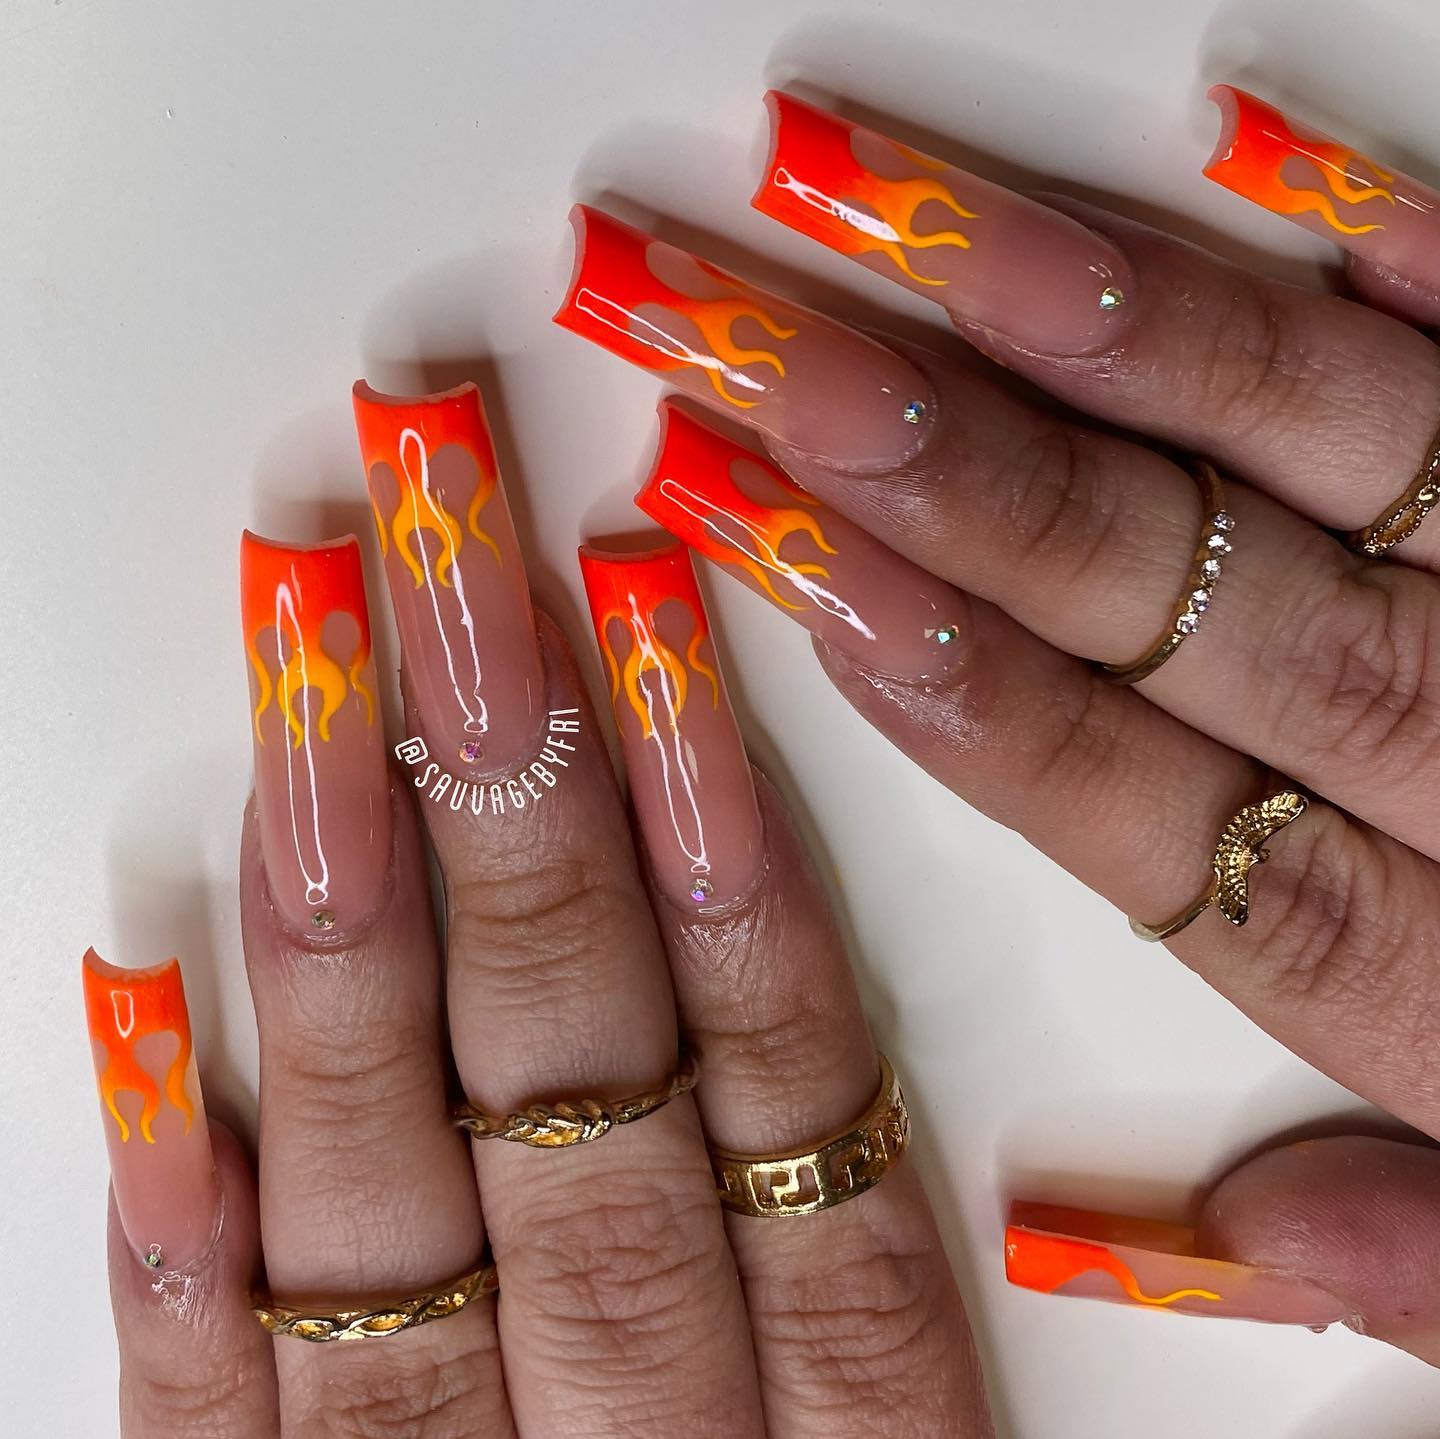 In most fires, orange and red colours are the common ones. So, they are highly preffered in flame nails, too. Why don't you have these on your nails to show everyone that you are a flame girl with your long acrylic nails?